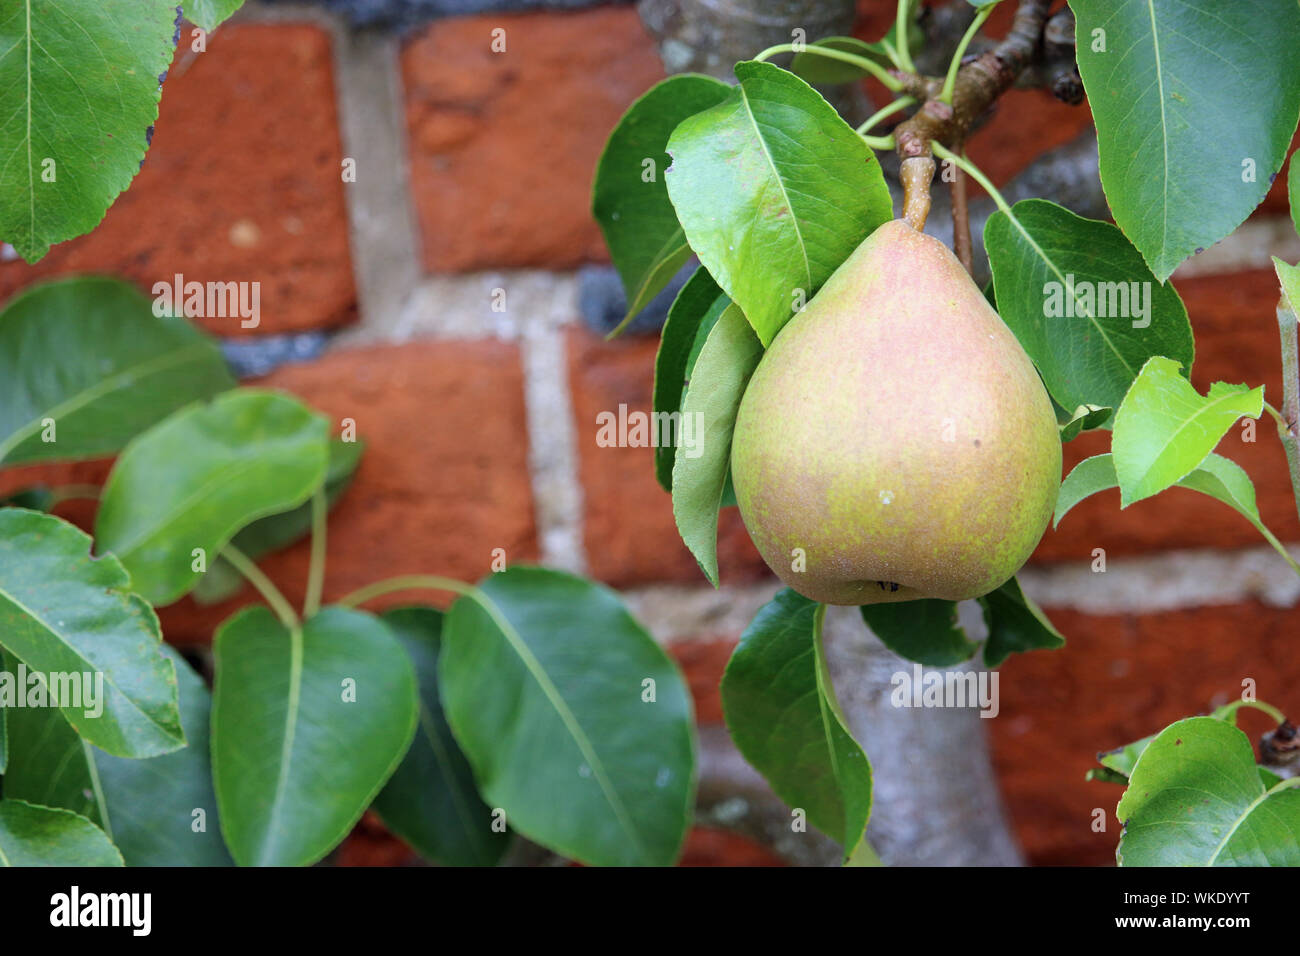 Dessert pear, Pyrus communis, of the variety Doyenne du Comice hanging on a tree with leaves and a red brick wall background. Stock Photo